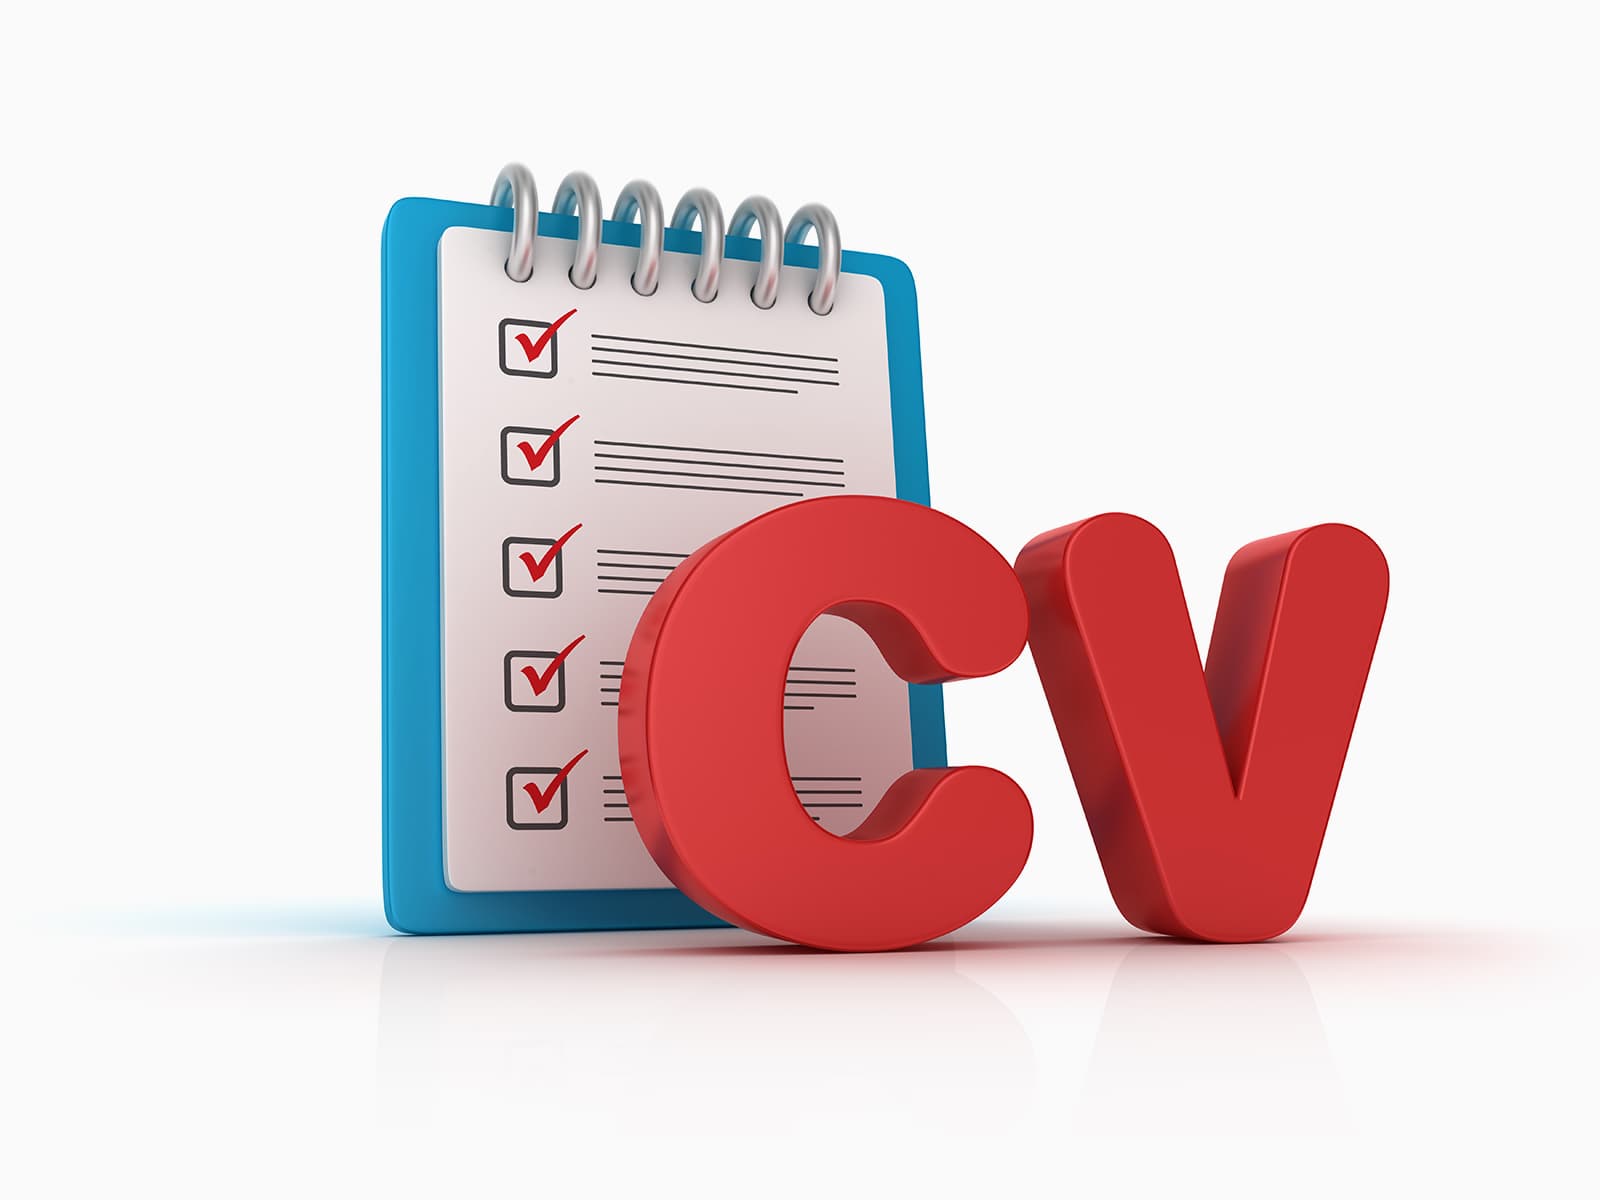 Who is our pro CV service for?